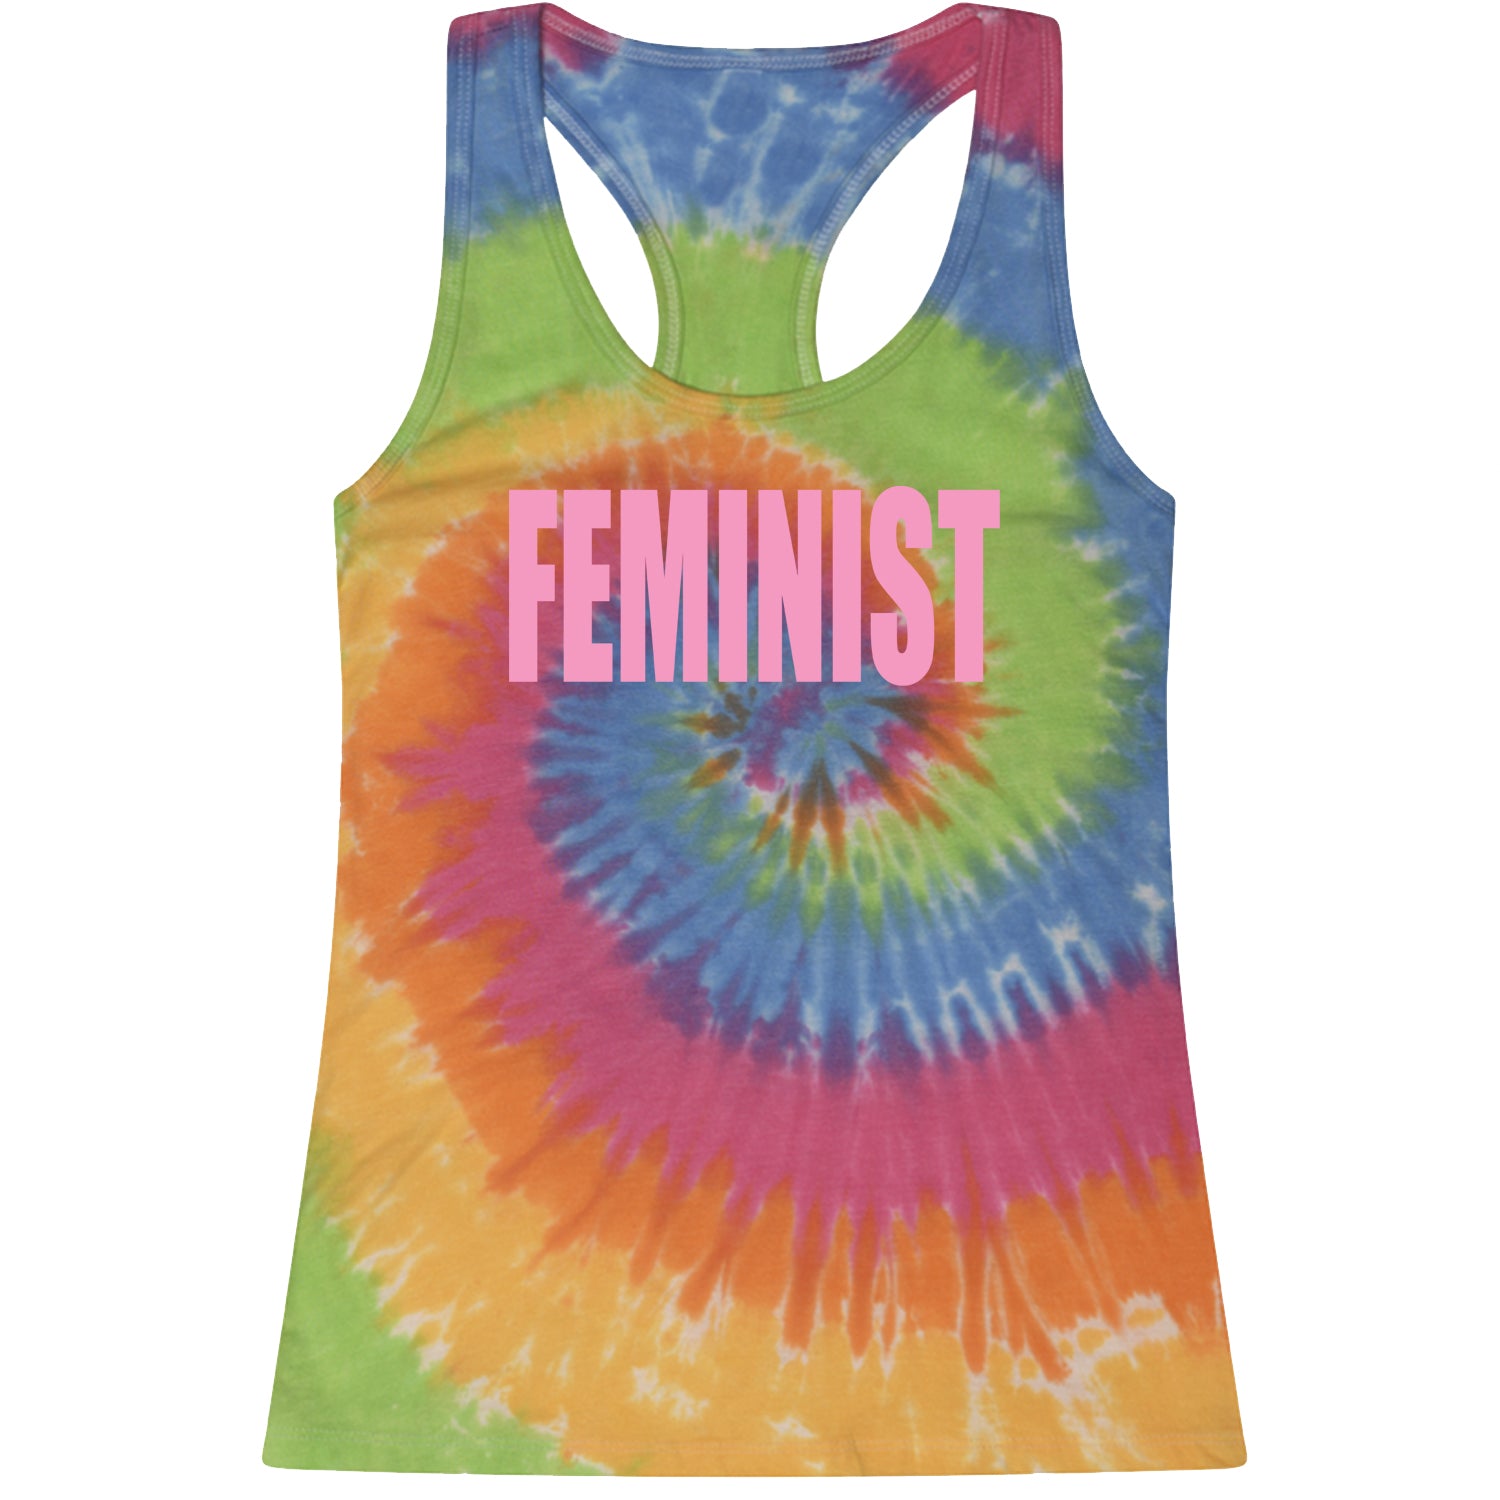 Feminist (Pink Print) Racerback Tank Top for Women a, equal, equality, feminism, feminist, gender, is, lgbtq, like, looks, nevertheless, pay, persisted, rights, she, this, what by Expression Tees